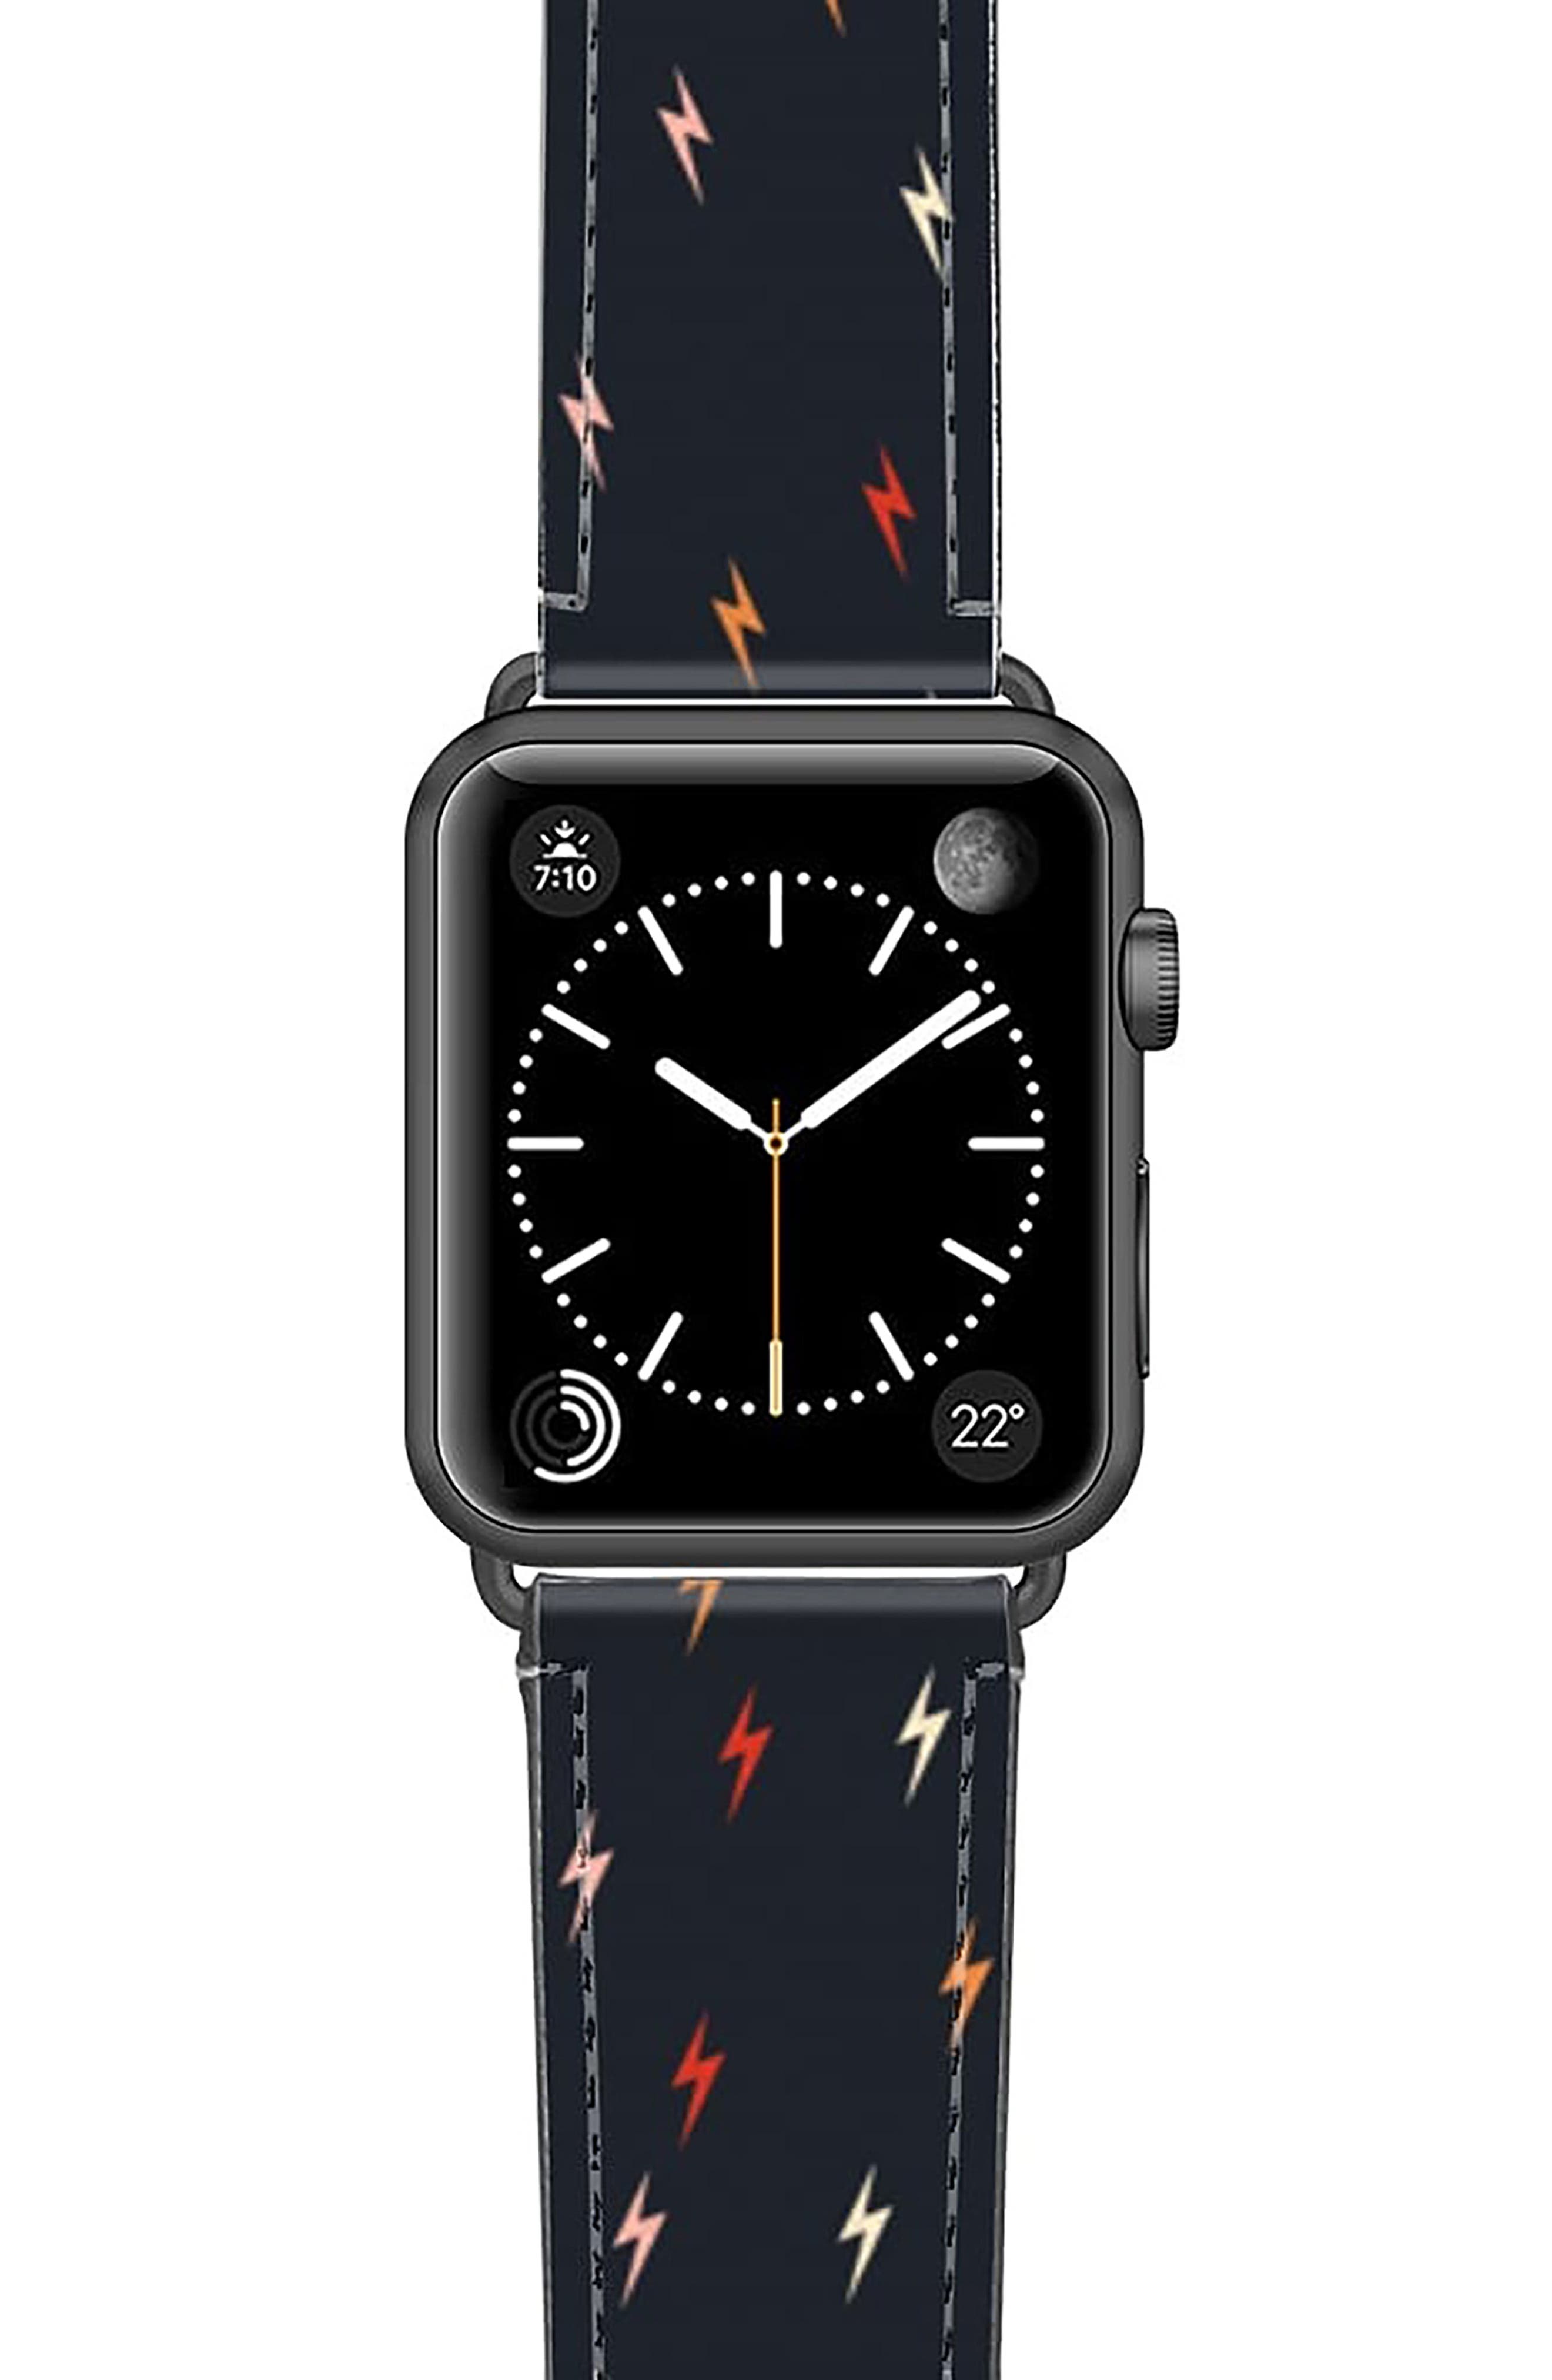 CASETiFY Pass the Bolt Saffiano Faux Leather Apple Watch Band in Black/Silver at Nordstrom